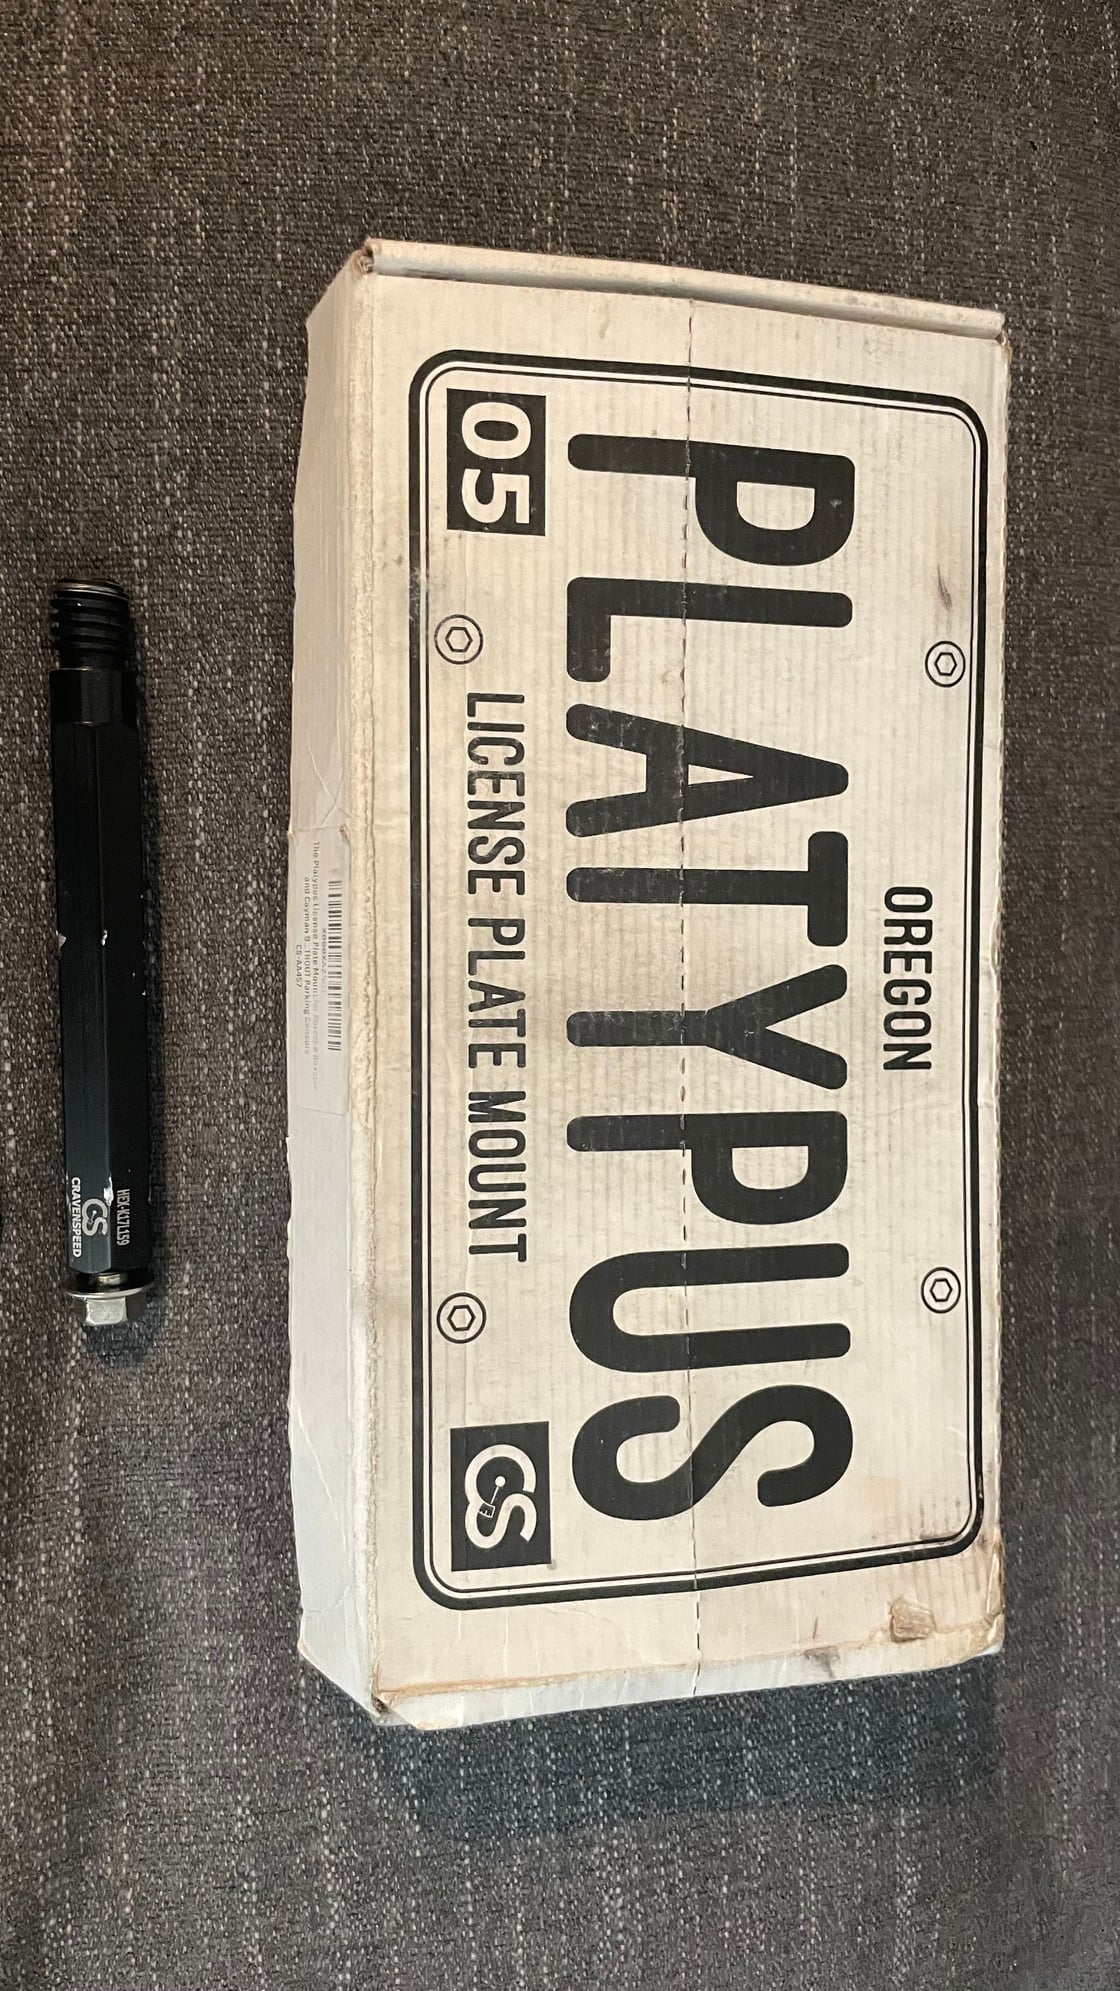 Exterior Body Parts - Platypus Front License Plate Tow Hook Mount - Used - 0  All Models - 2014 to 2016 Porsche Cayman - Los Angeles, CA 90045, United States